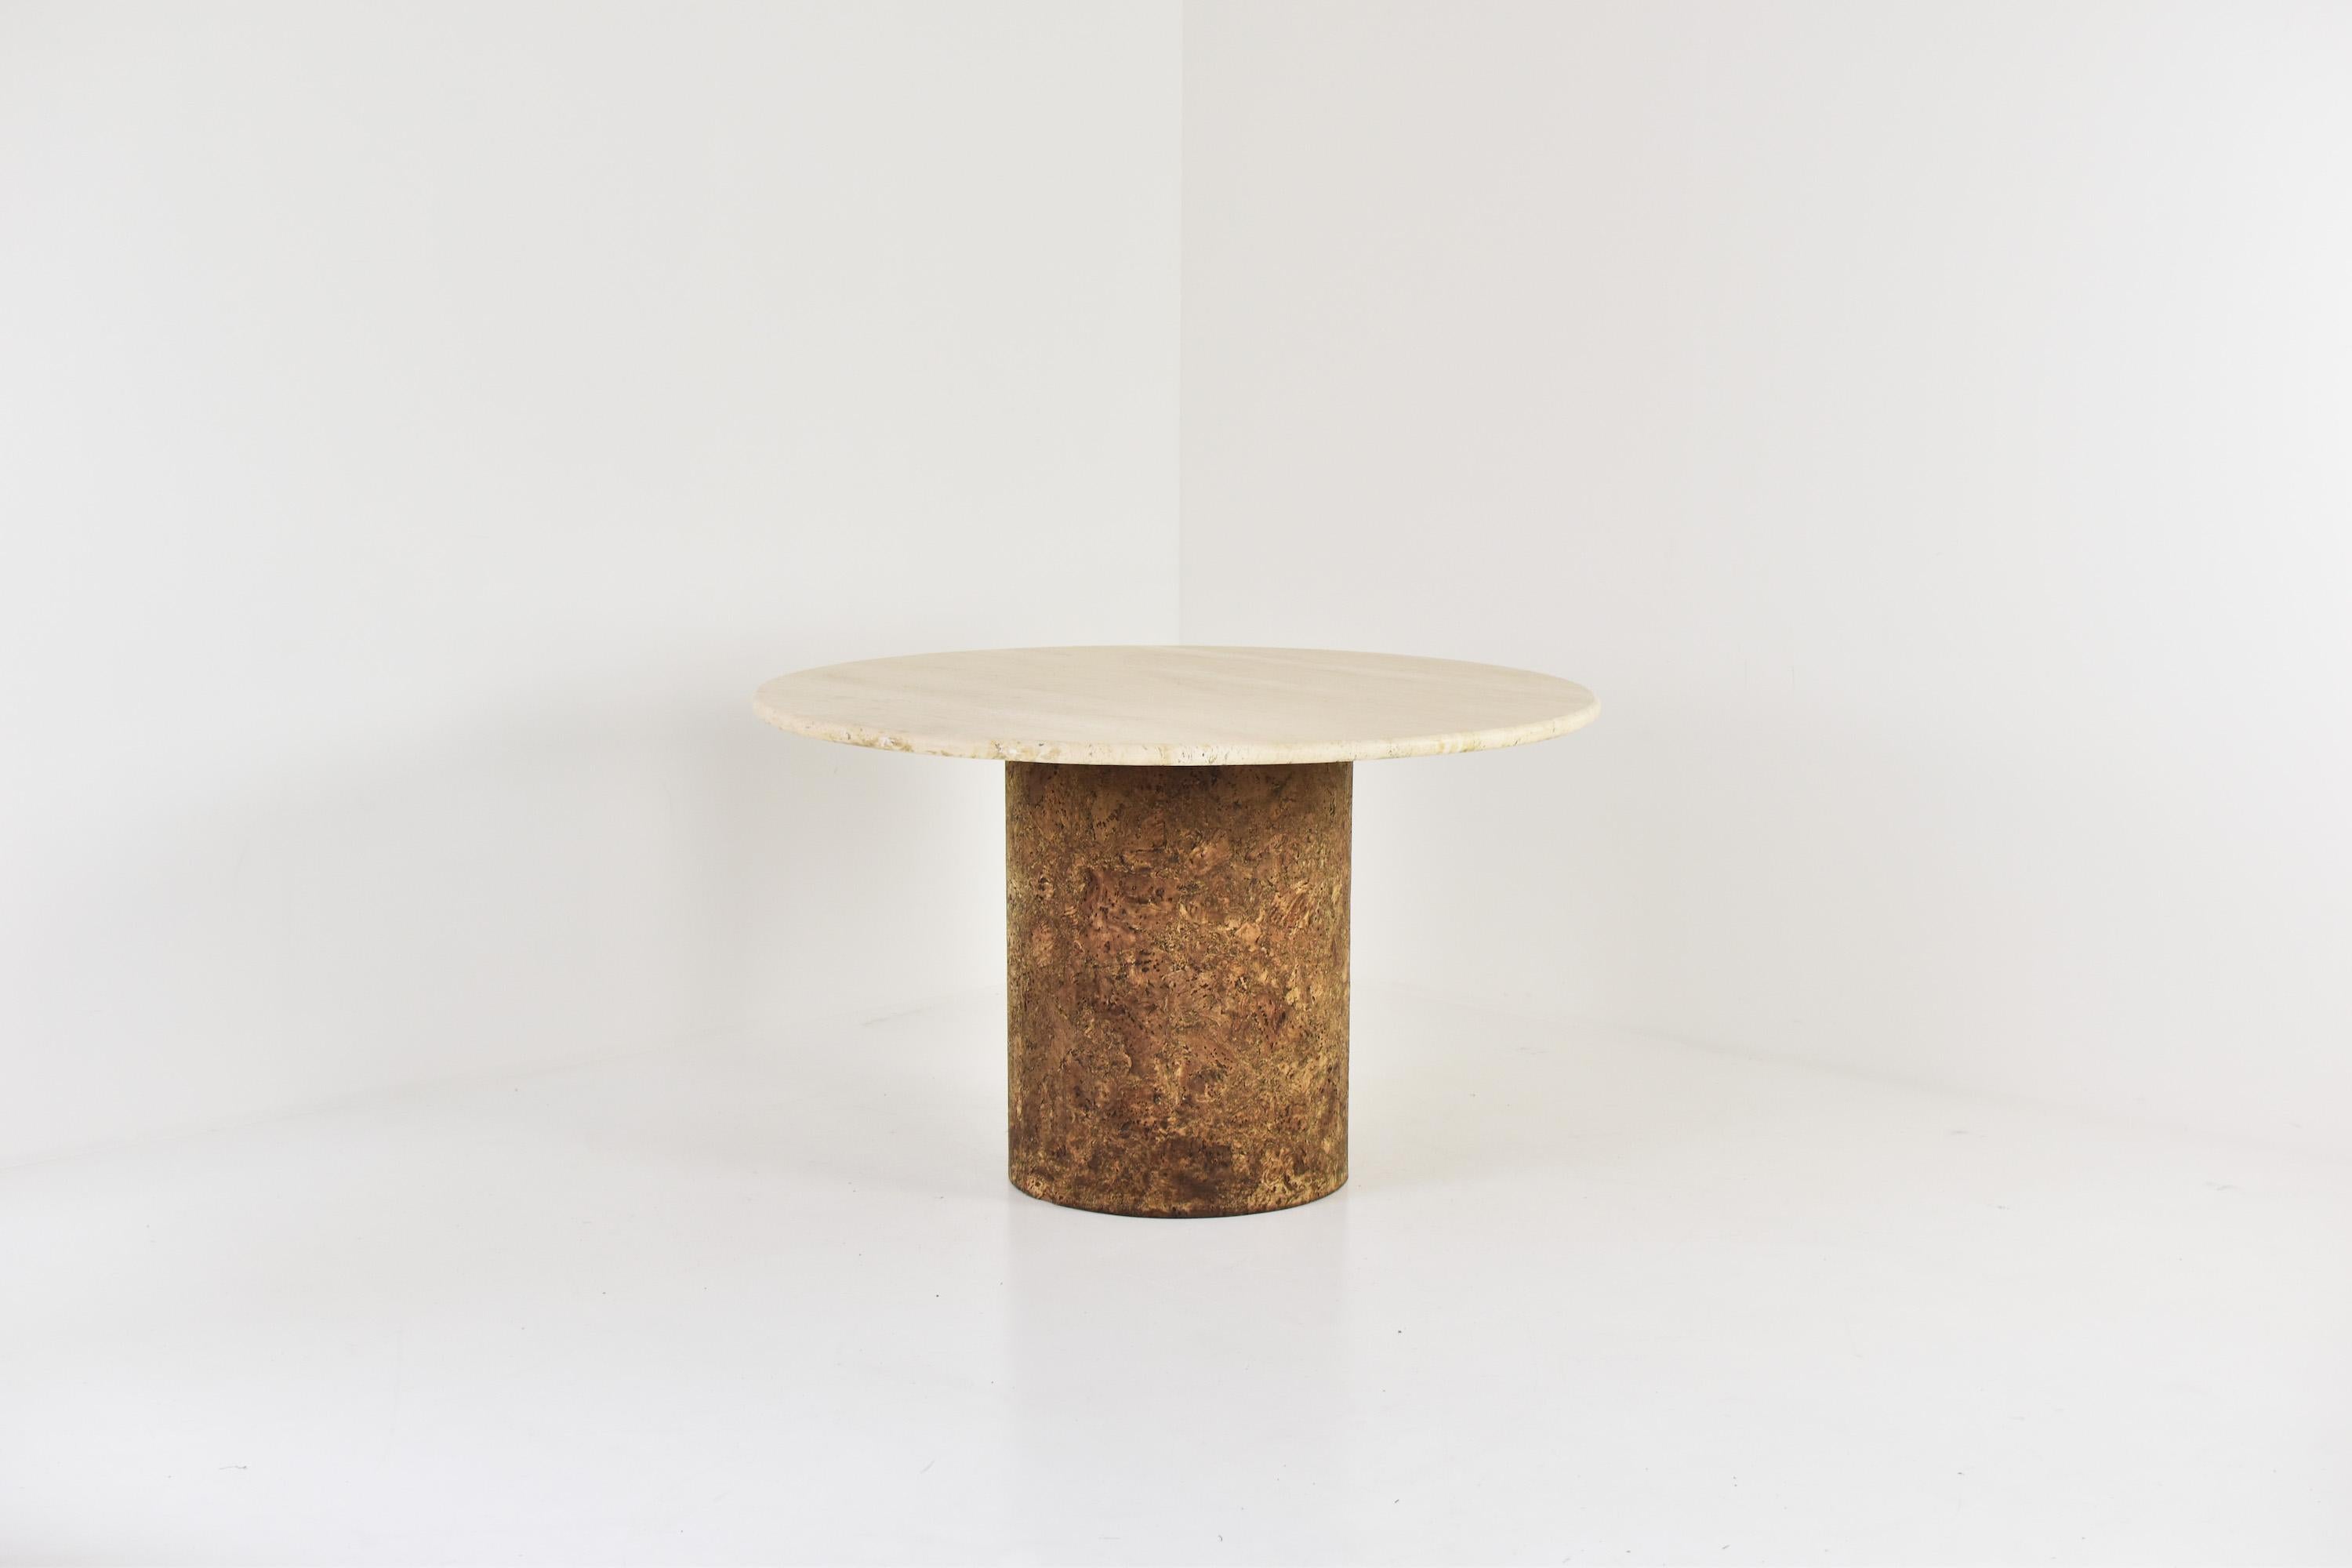 Interesting dining table in travertine and cork from the 1960’s. This table features a travertine top and the base is made out of cork. The table is in a beautiful and original condition and has no chips or cracks.